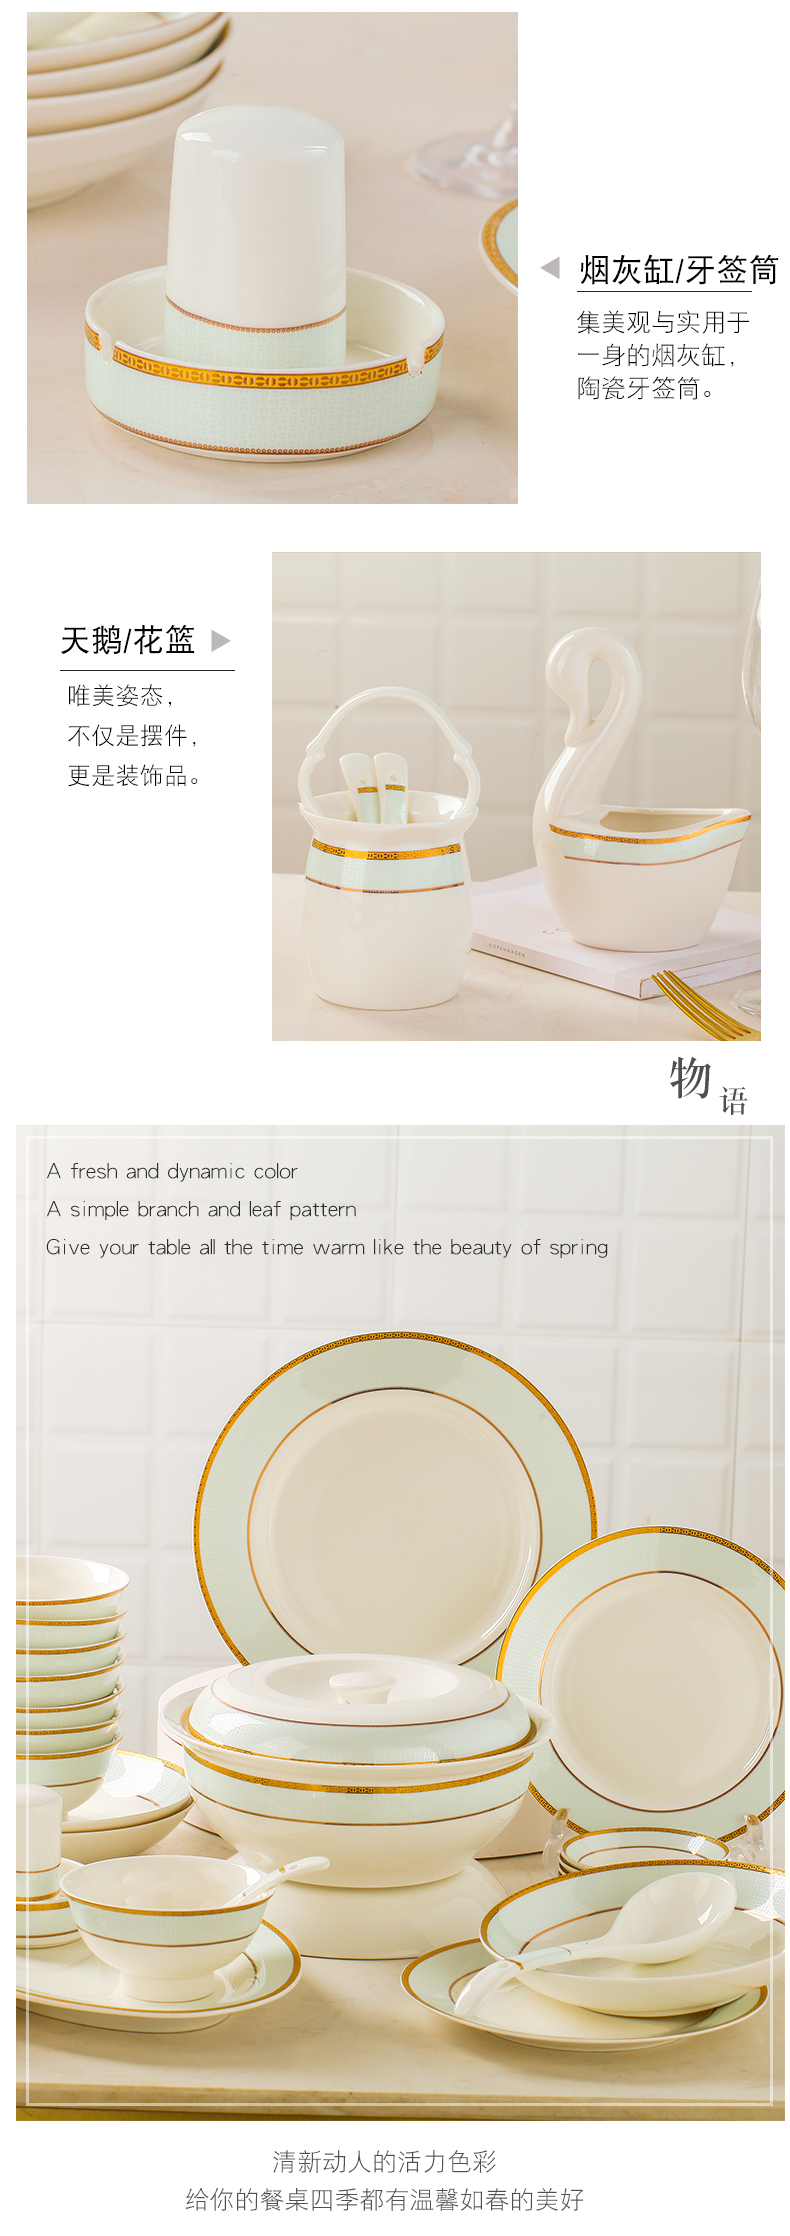 Jingdezhen is pure and fresh and green lotus 】 【 DIY ipads porcelain tableware set free combination dishes household teaspoons of ceramic spoon